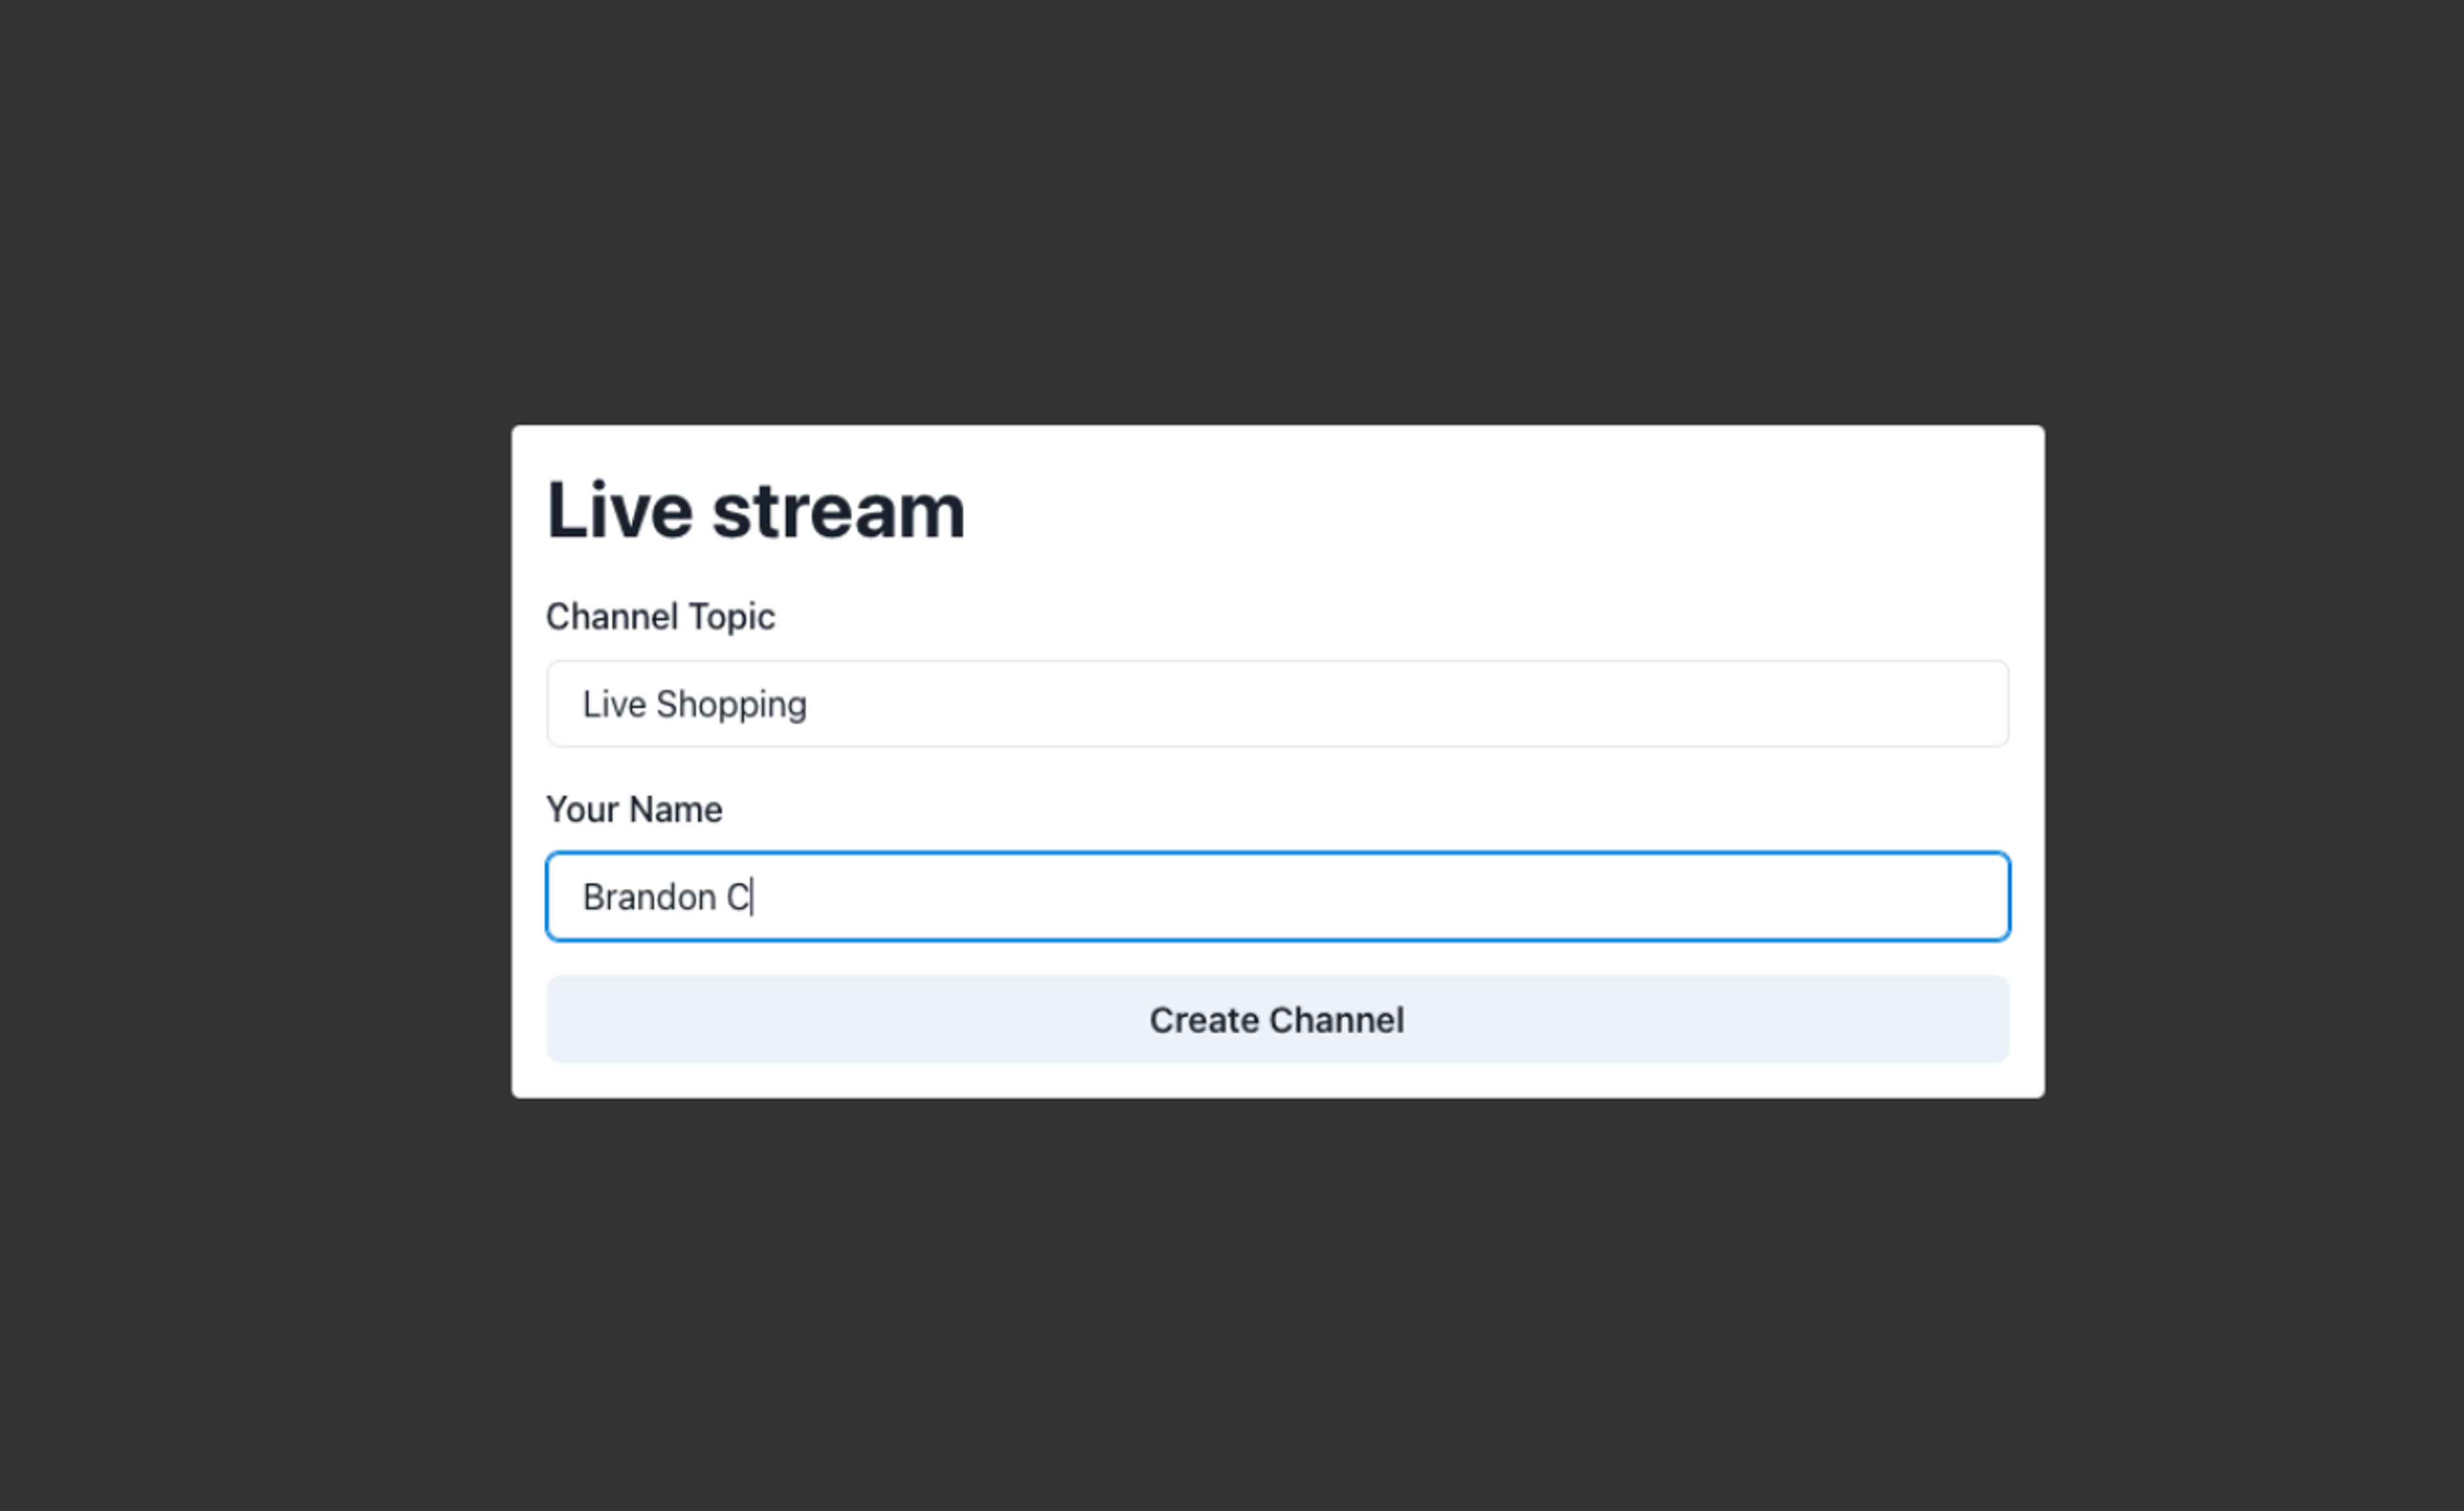 Clicking “Create Channel” will create a Mux Space and a Live Stream object. 